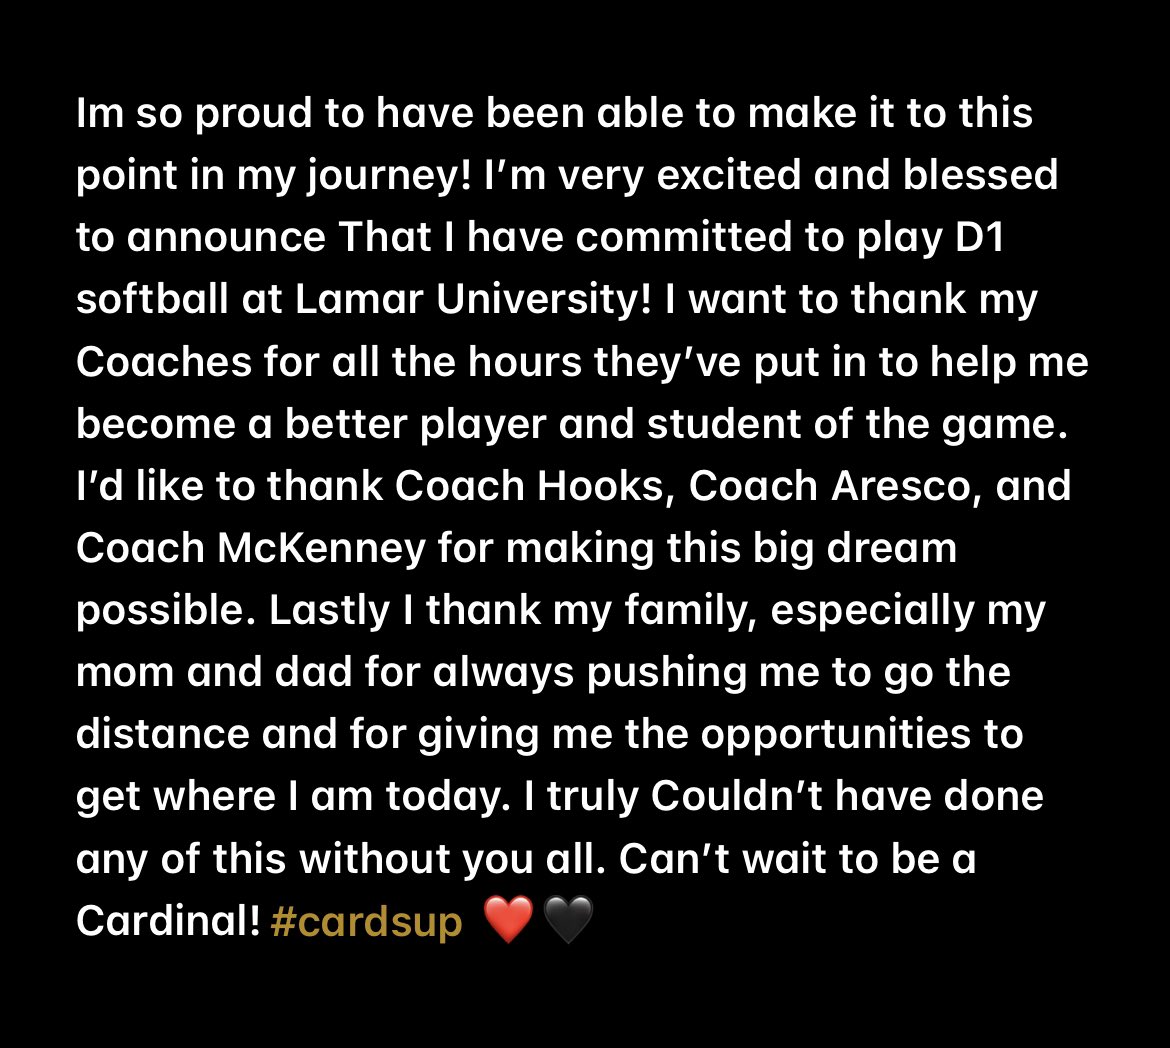 So excited for this next chapter!! ❤️🖤#cardsup #lamarsoftball @AmyHooks10 @anthony_aresco @CoachMcKenneyLU